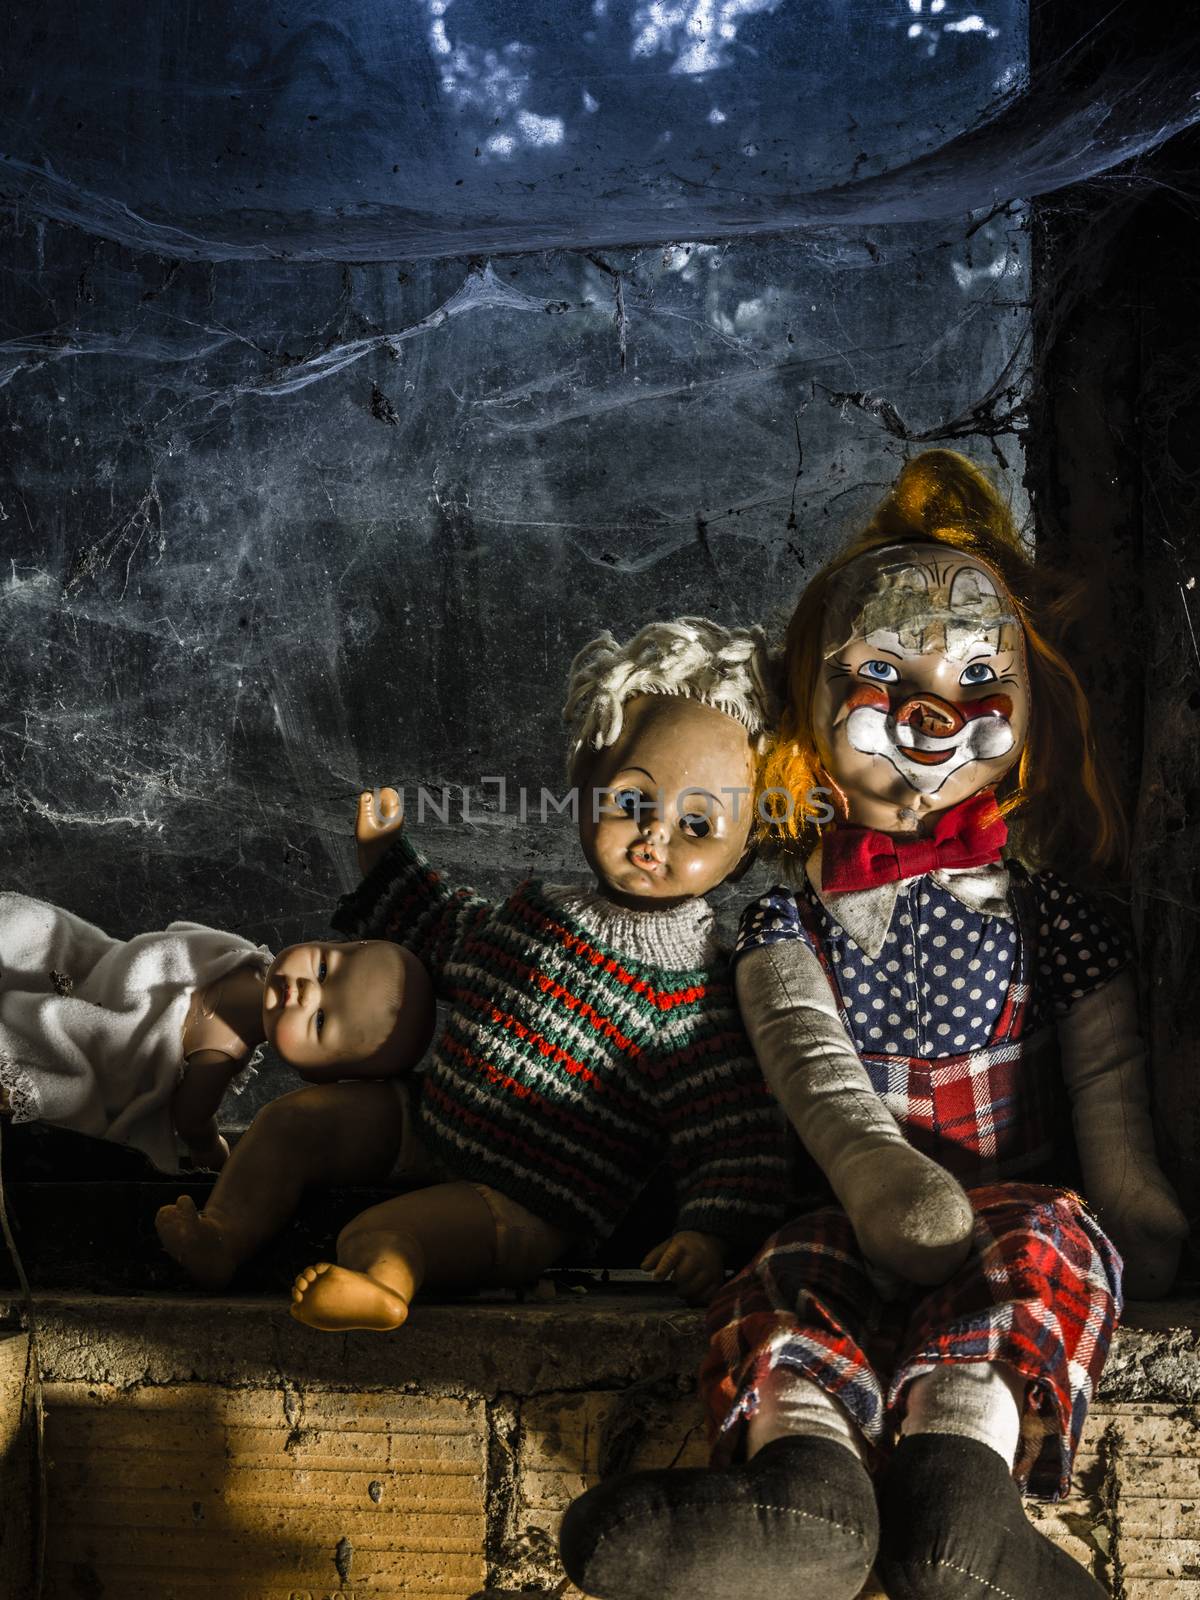 Photo of old dolls and an axe resting on an old window ledge covered in spiderwebs and dust.